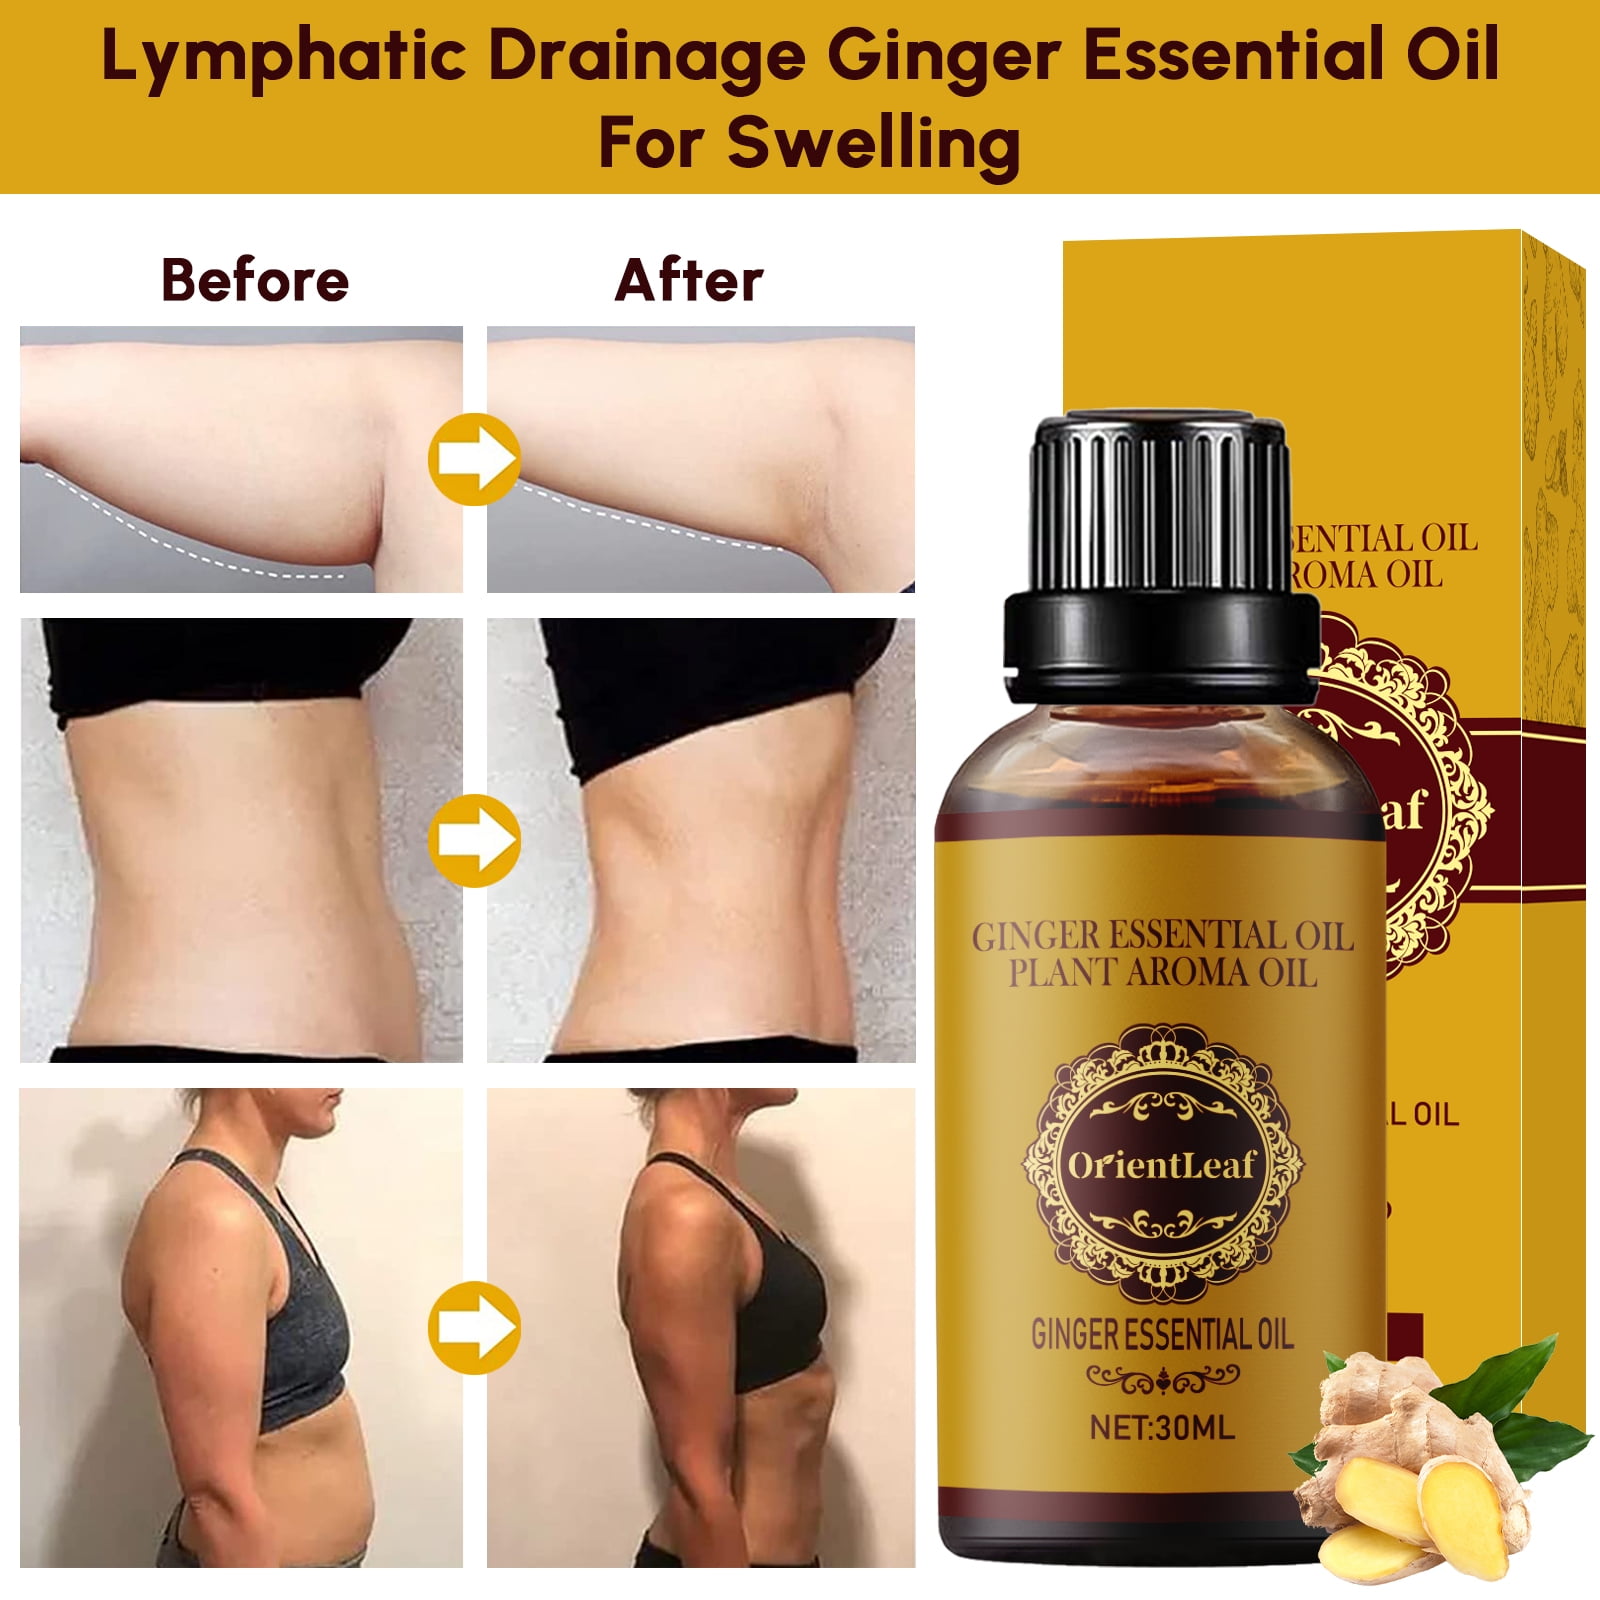 Buy Orientleaf 100 Pure Lymphatic Drainage Ginger Oil Ginger Essential Oil Belly Drainage